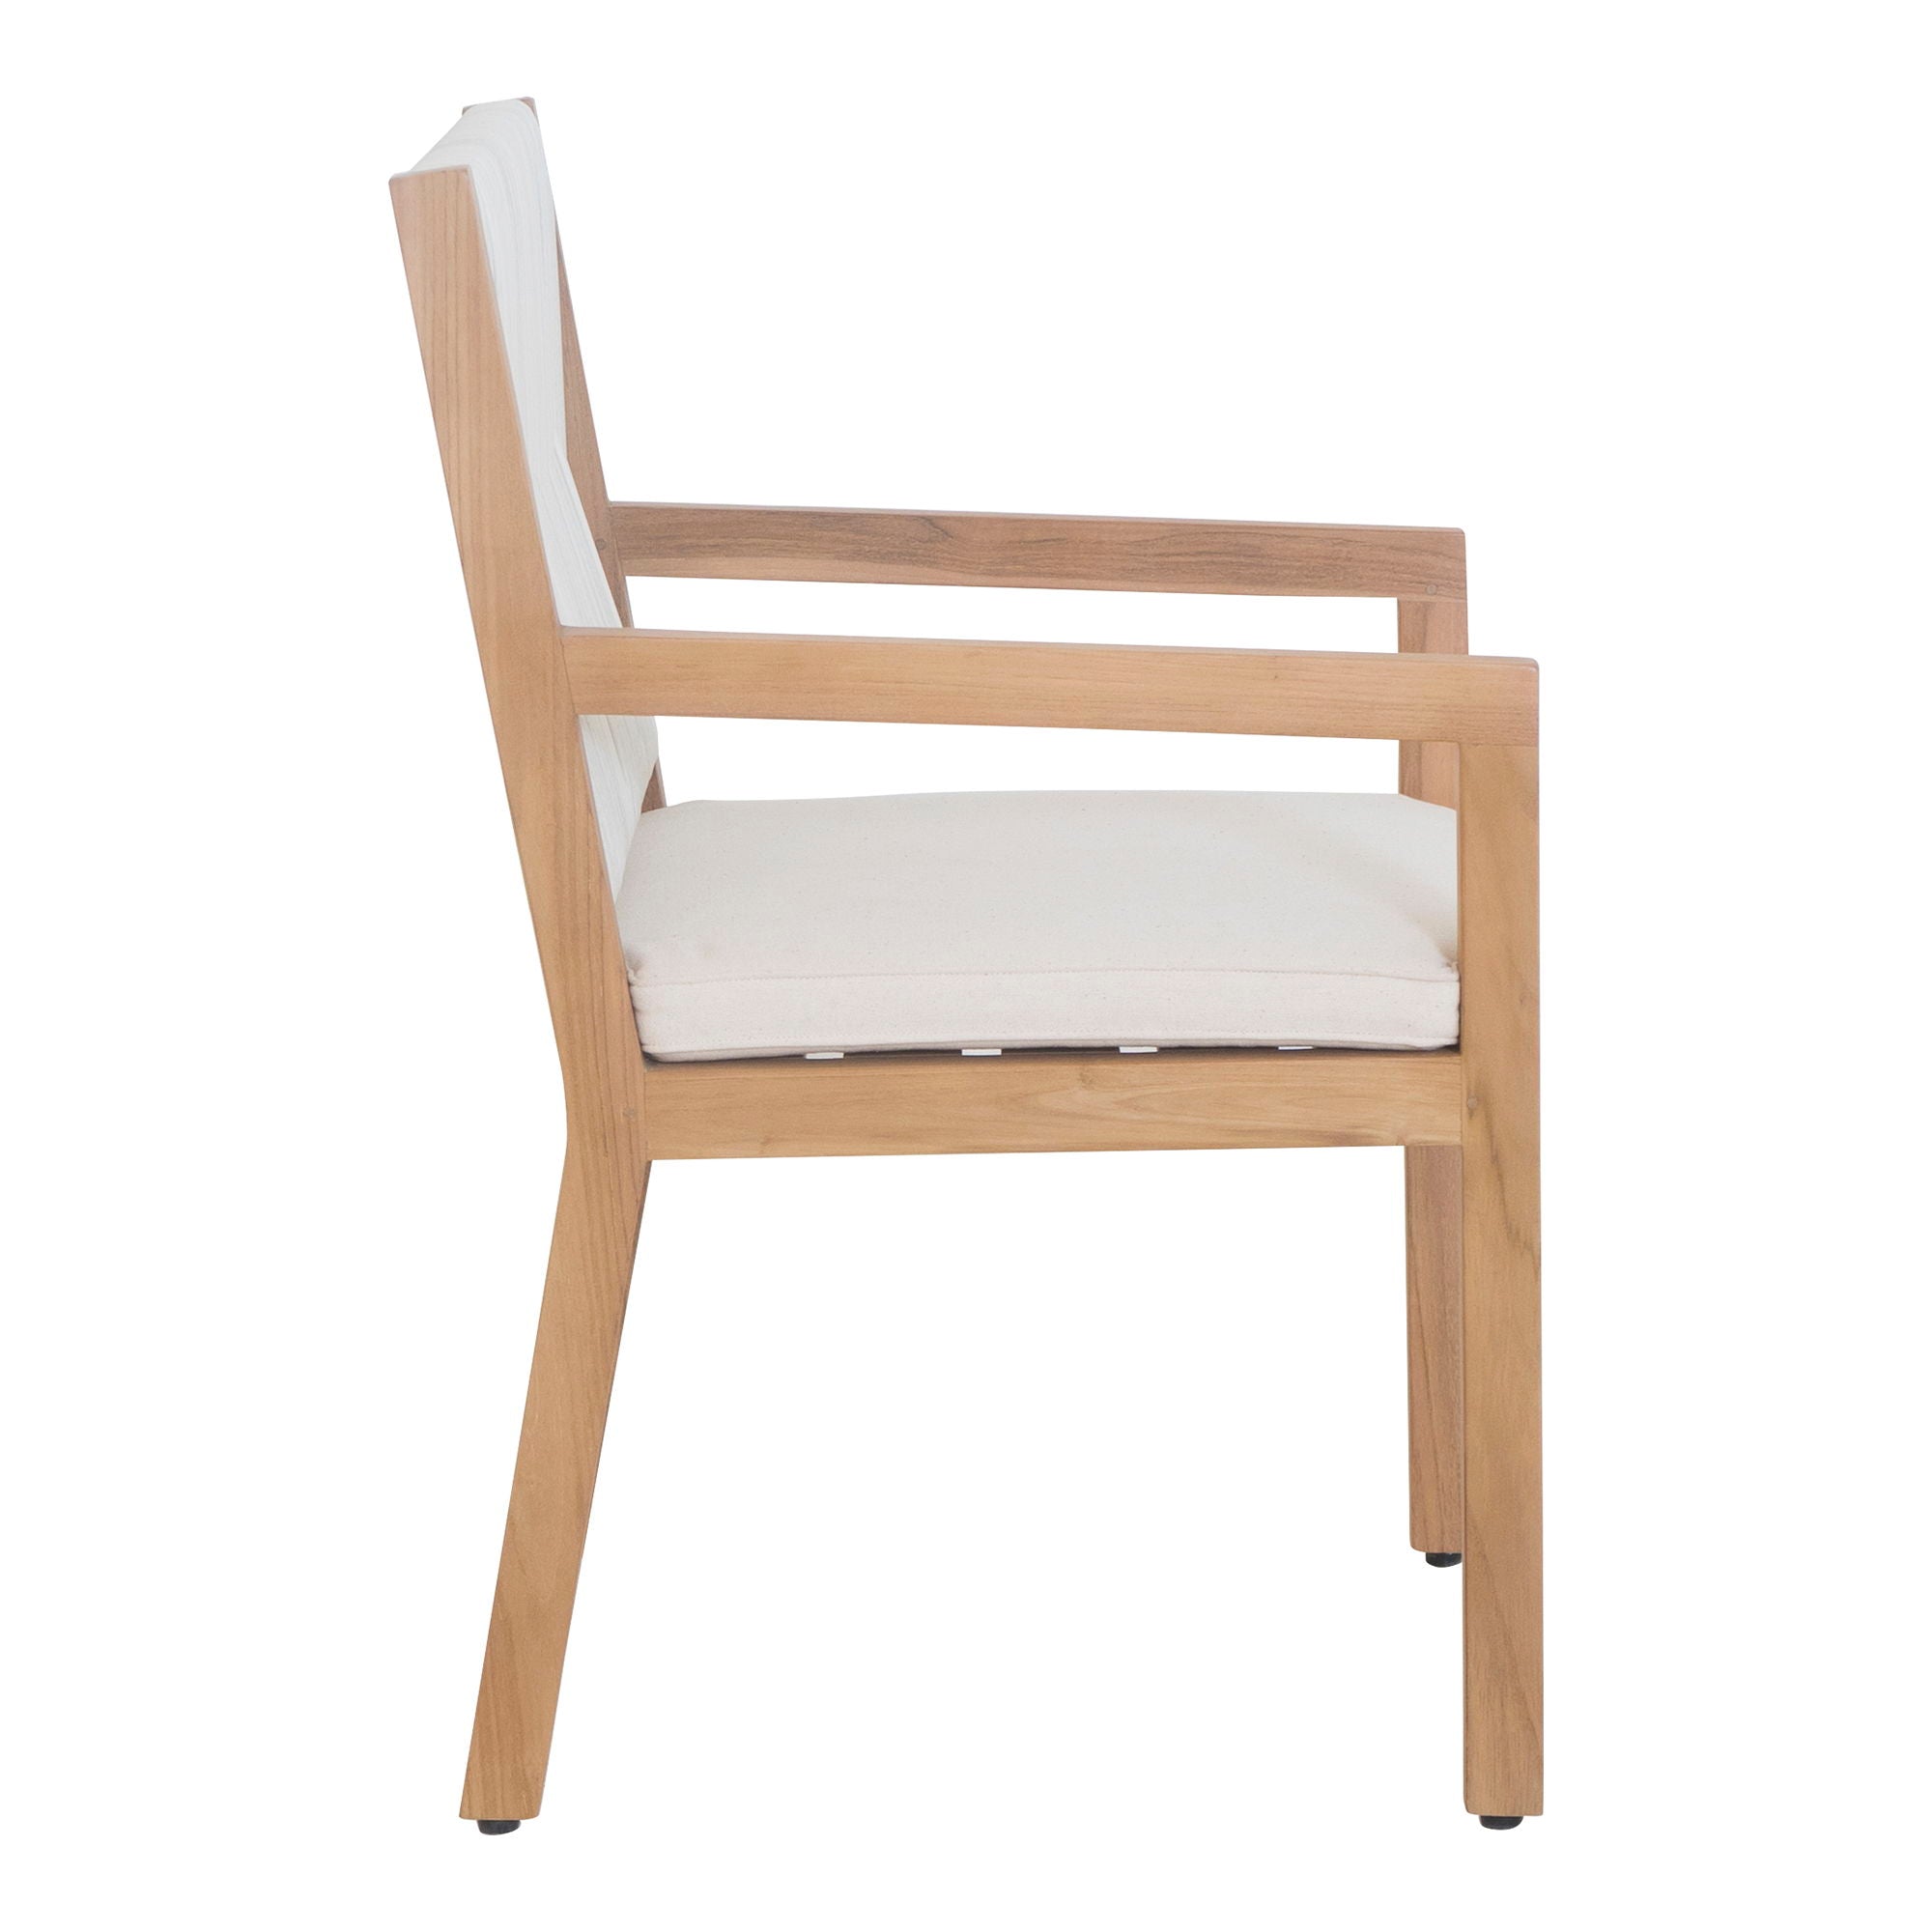 Luce - Outdoor Dining Chair - Beige